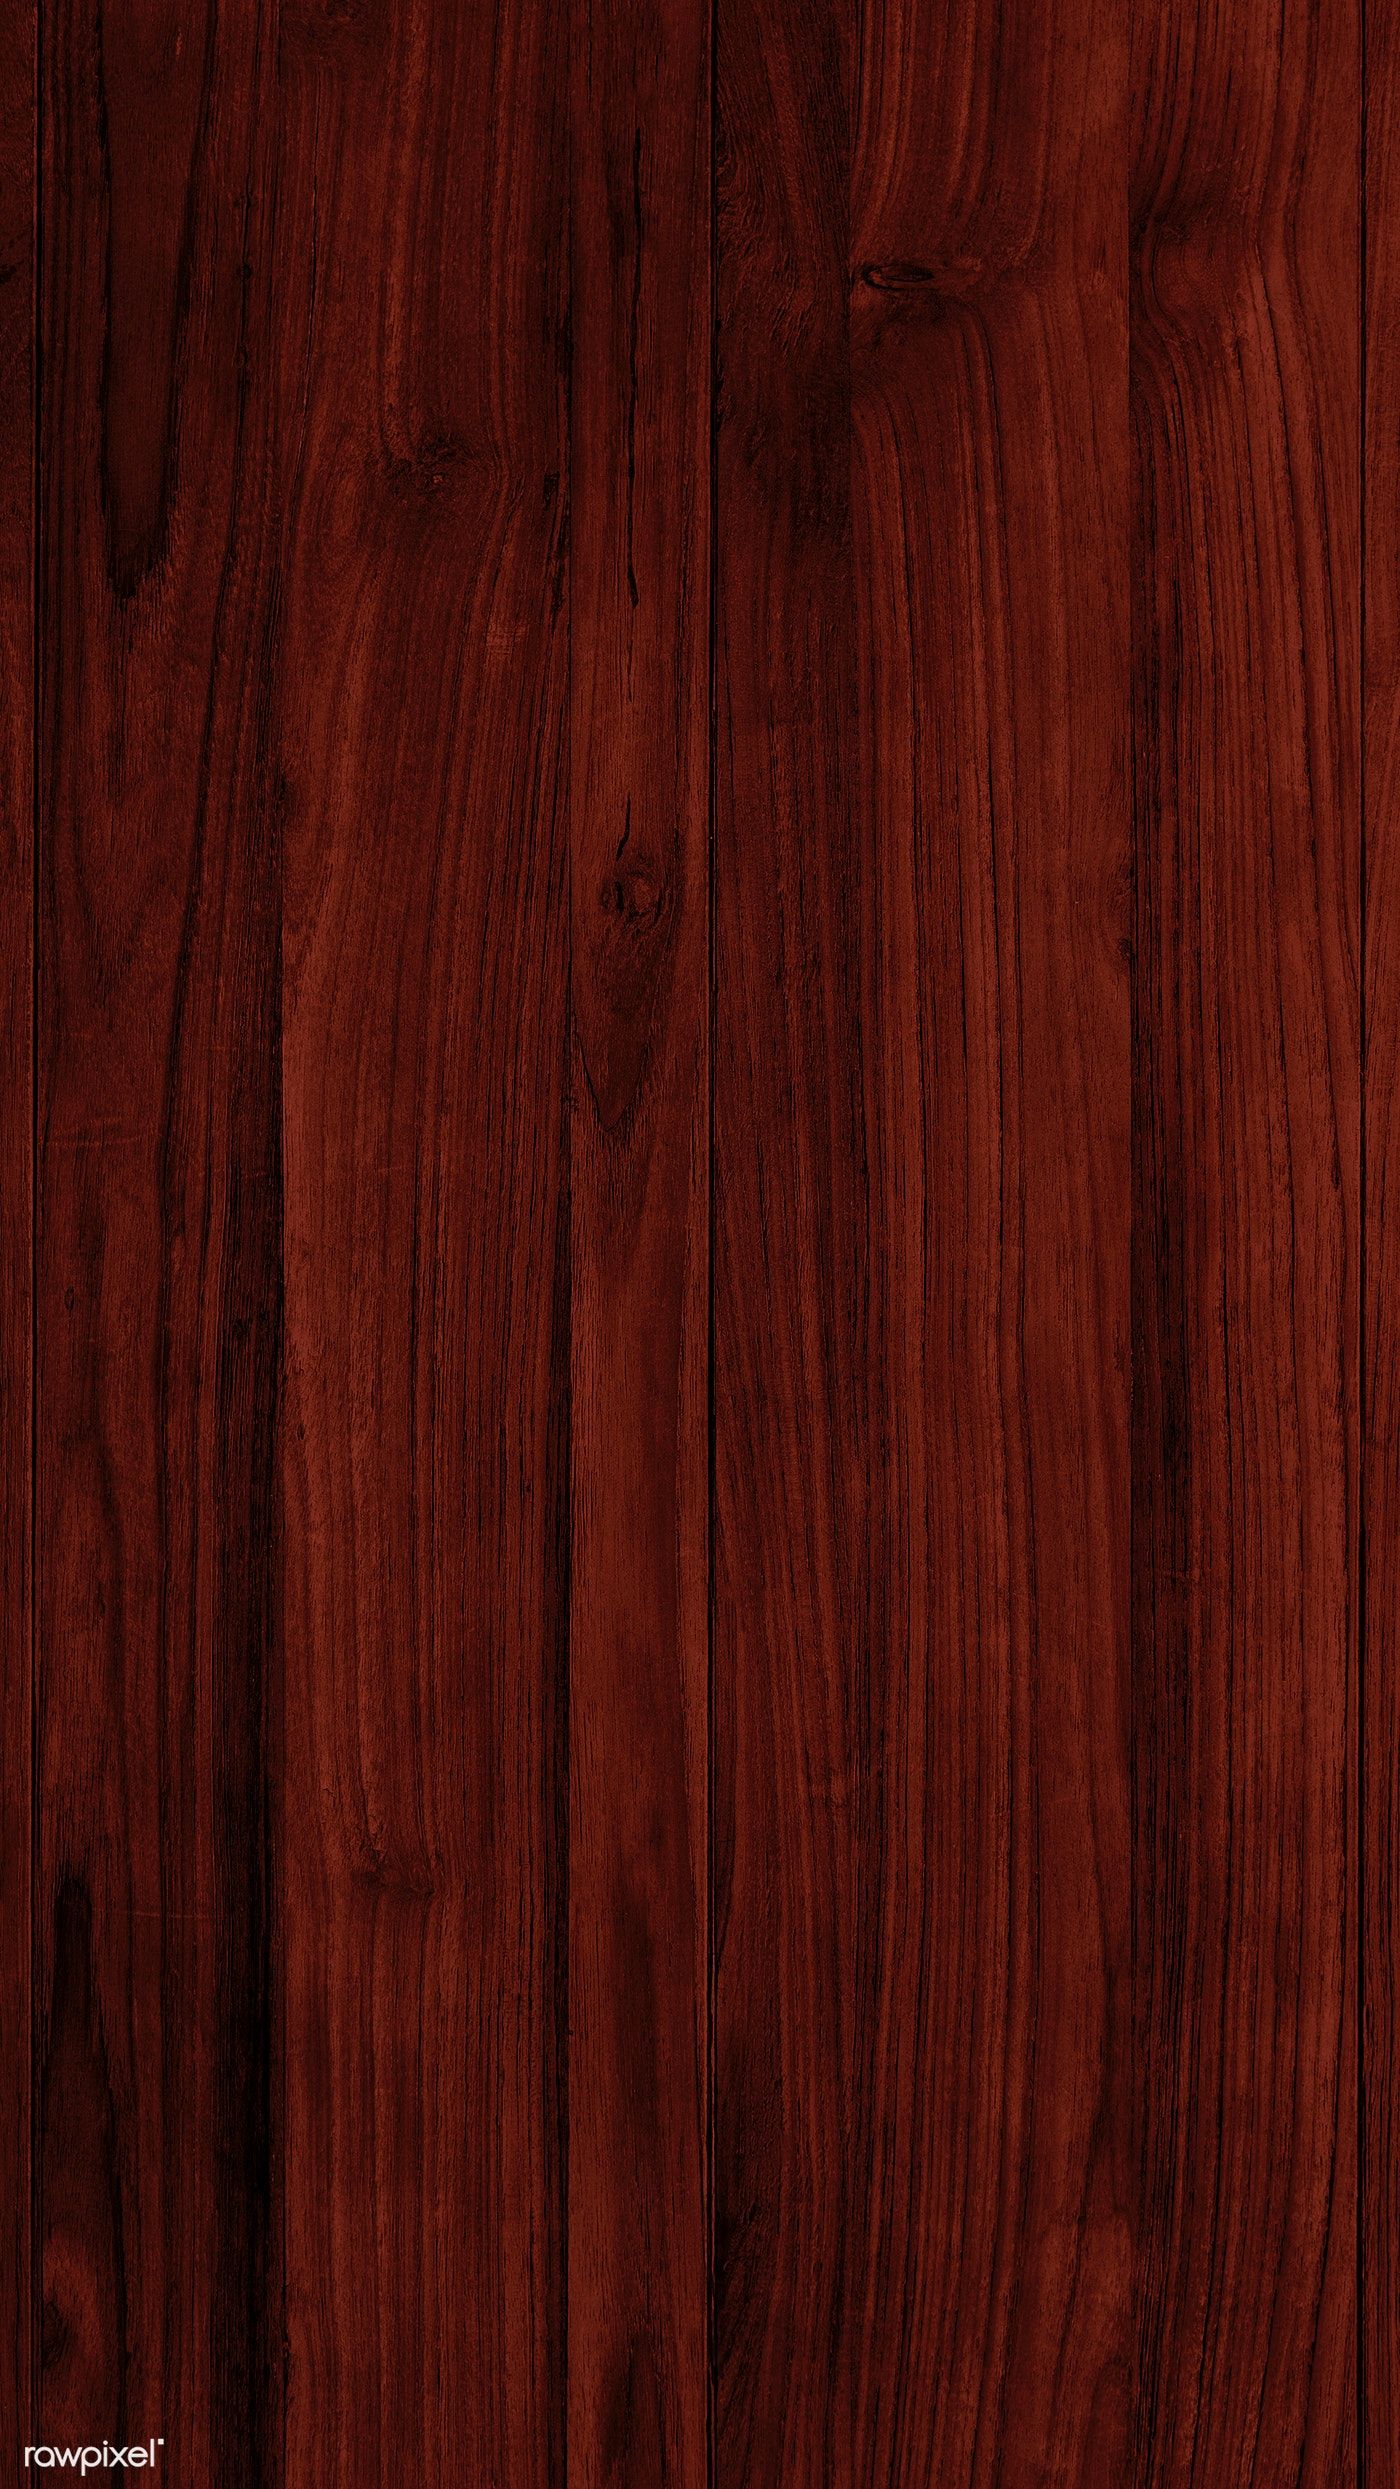 Red wood textured mobile wallpaper background free image by